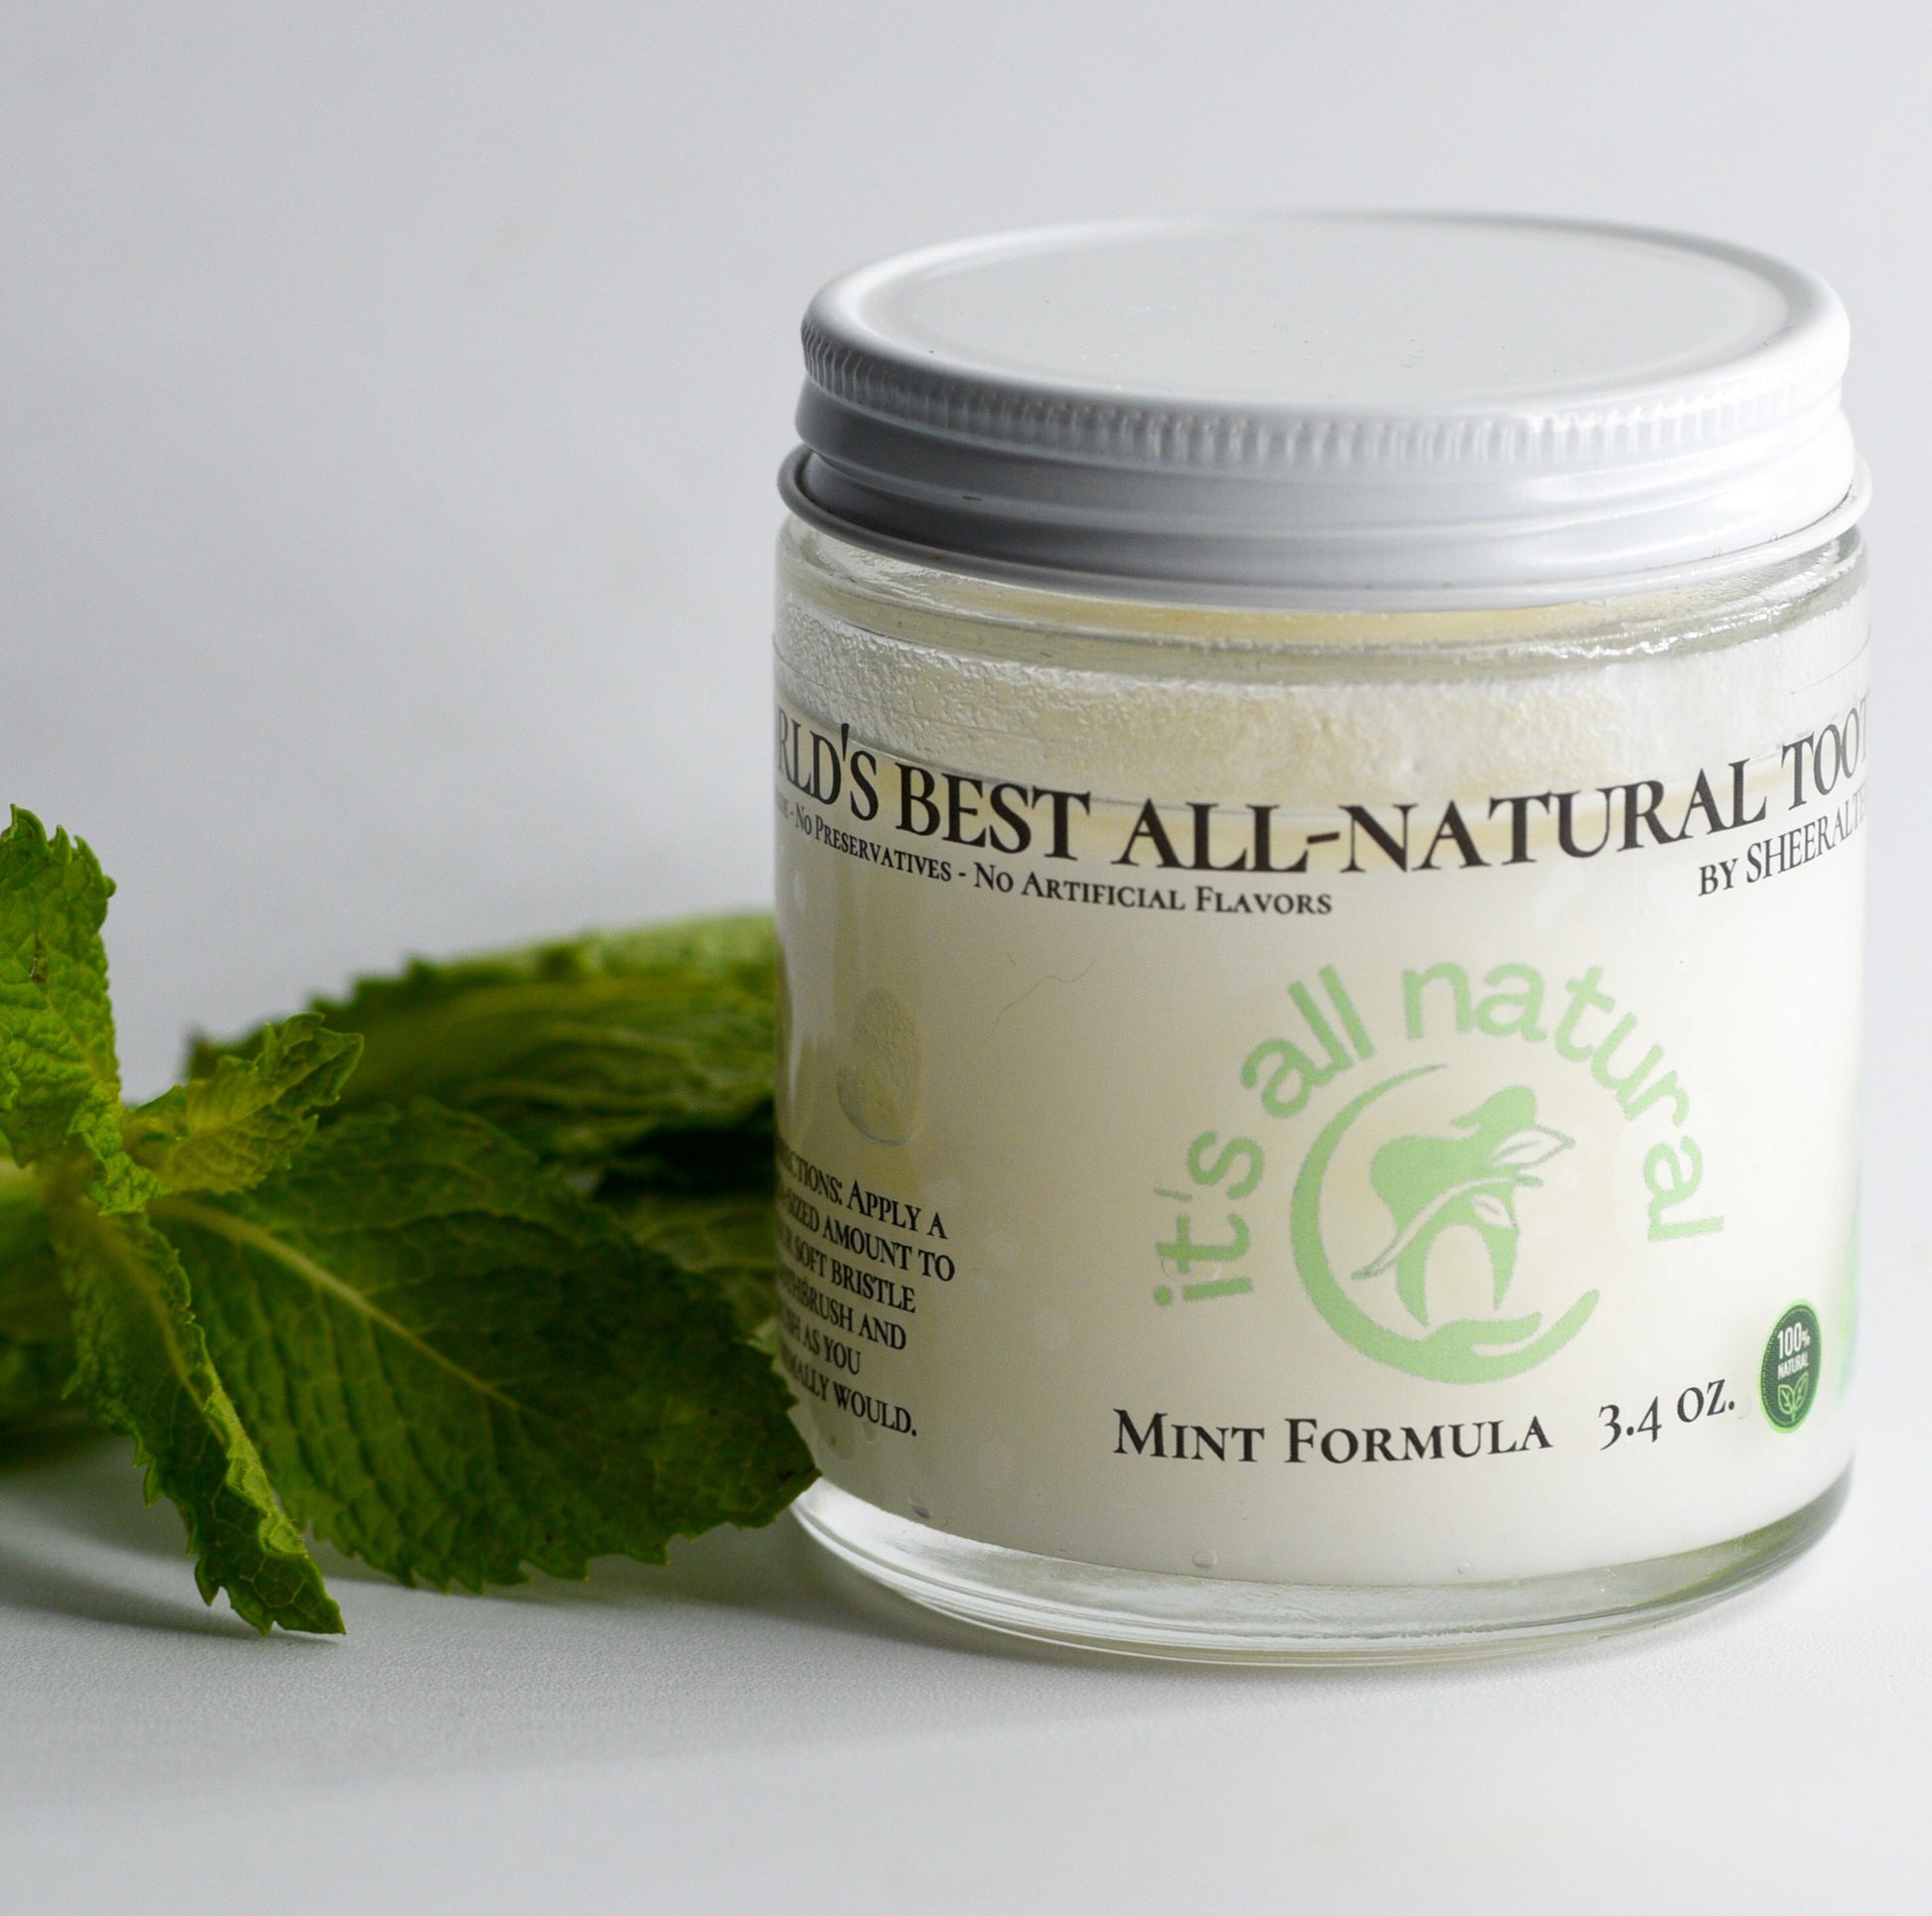 Coconut Oil Toothpaste | Coconut Toothpaste | Mint Toothpaste | sheeralternatives